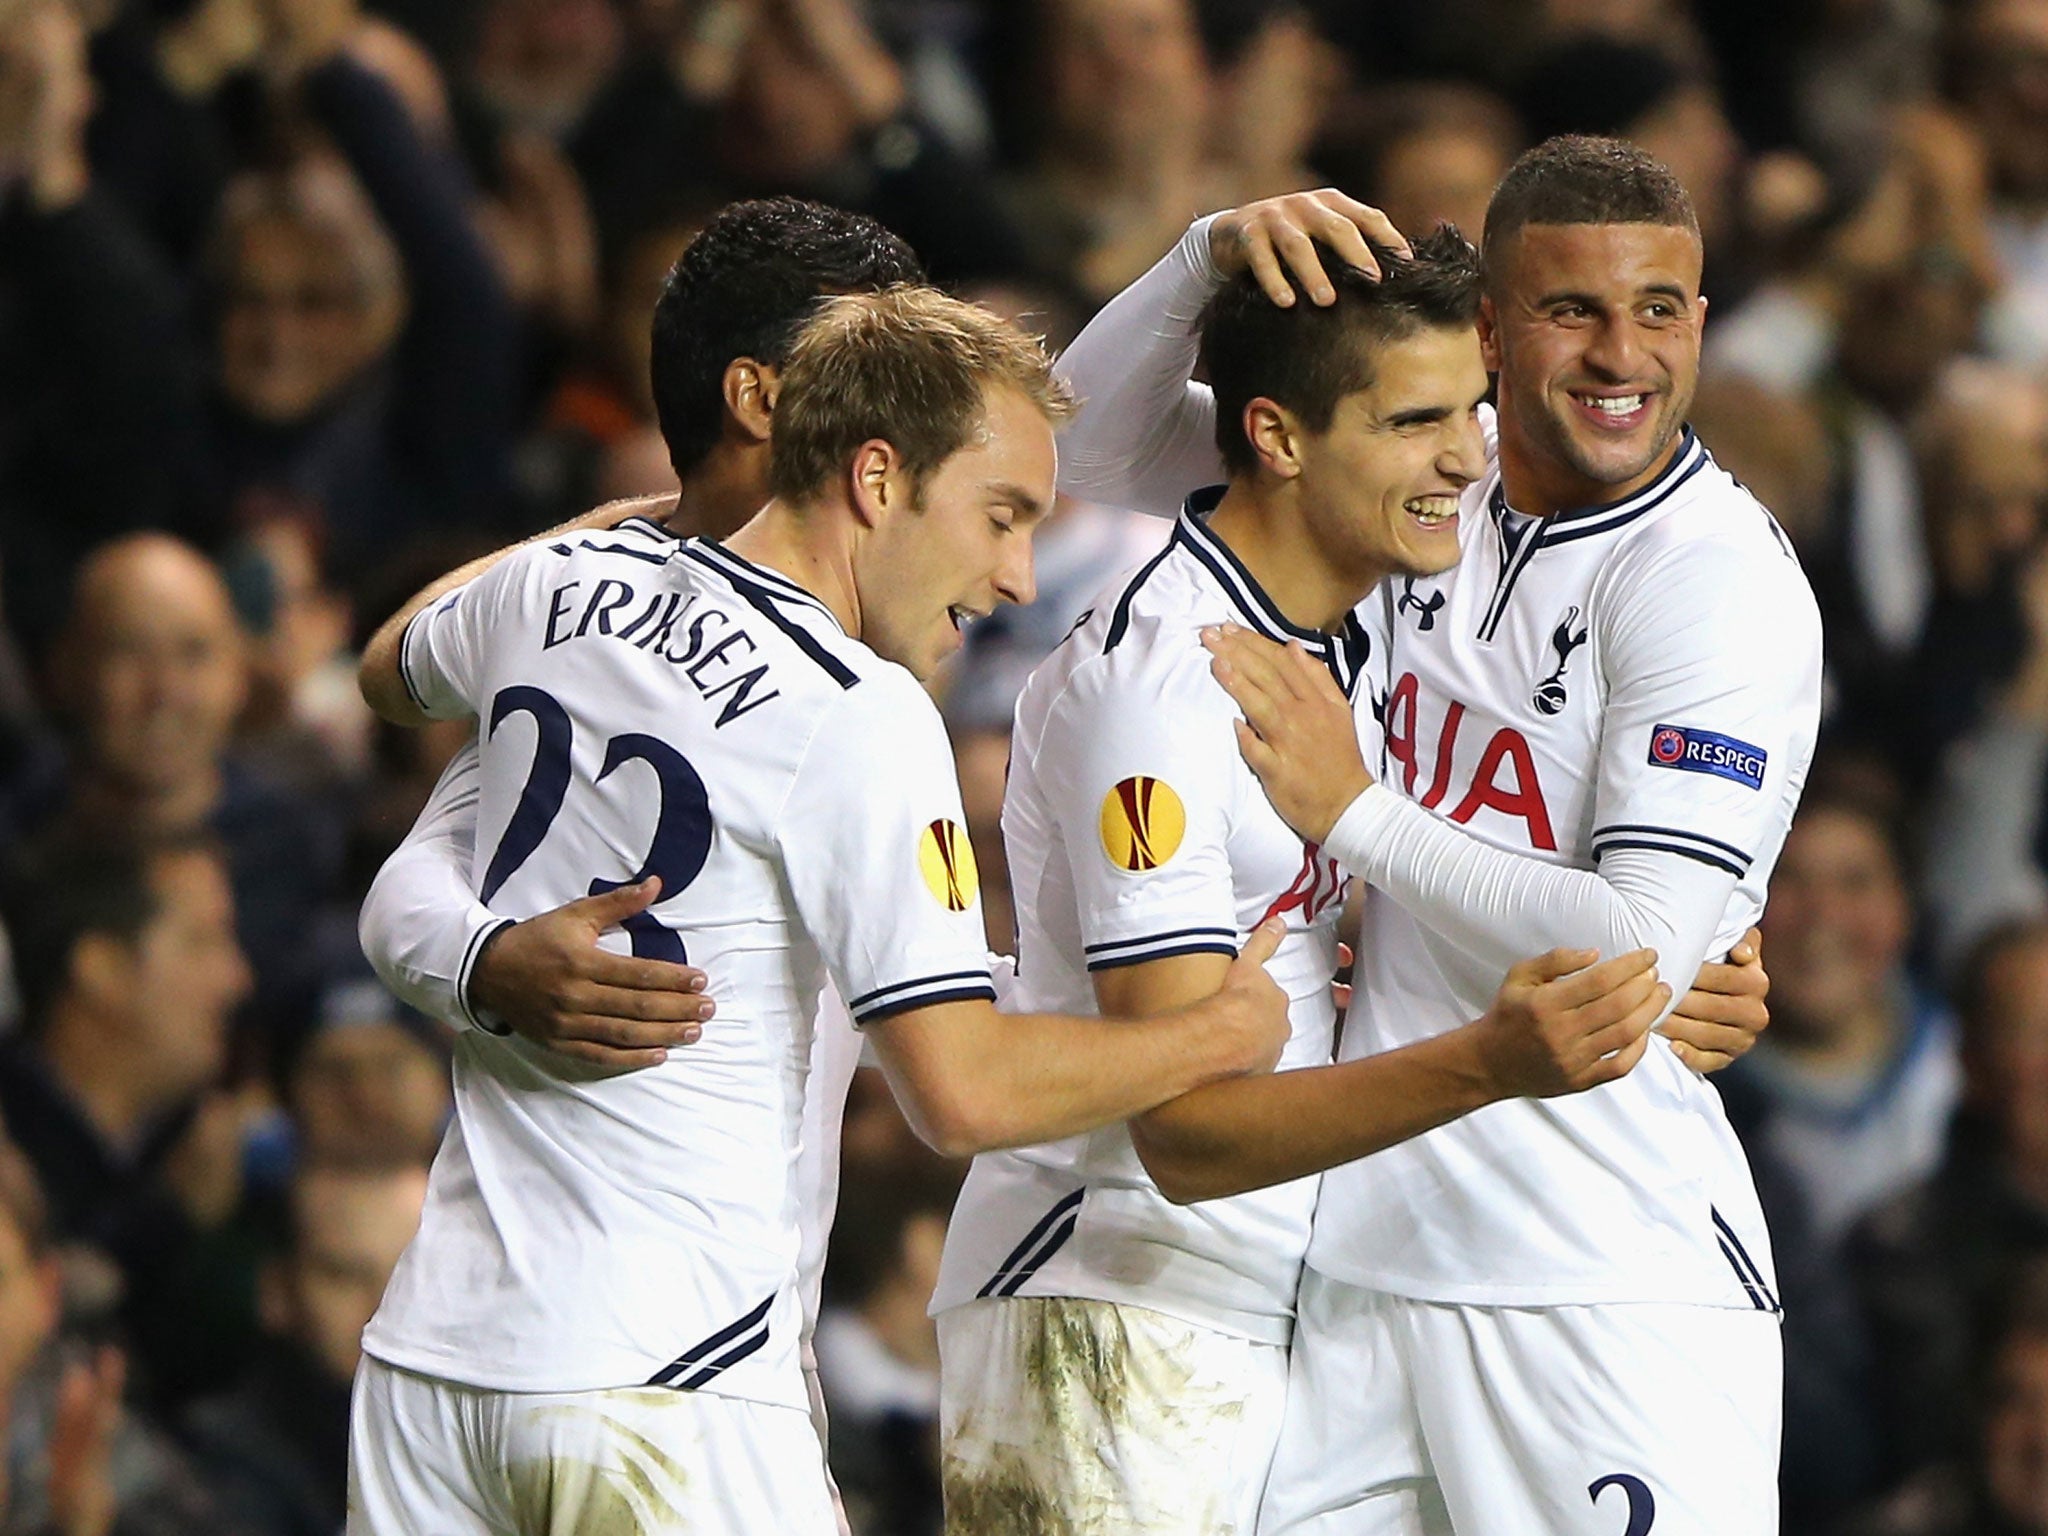 Erik Lamela (second from right) is mobbed after scoring his first Tottenham goal against FC Sheriff